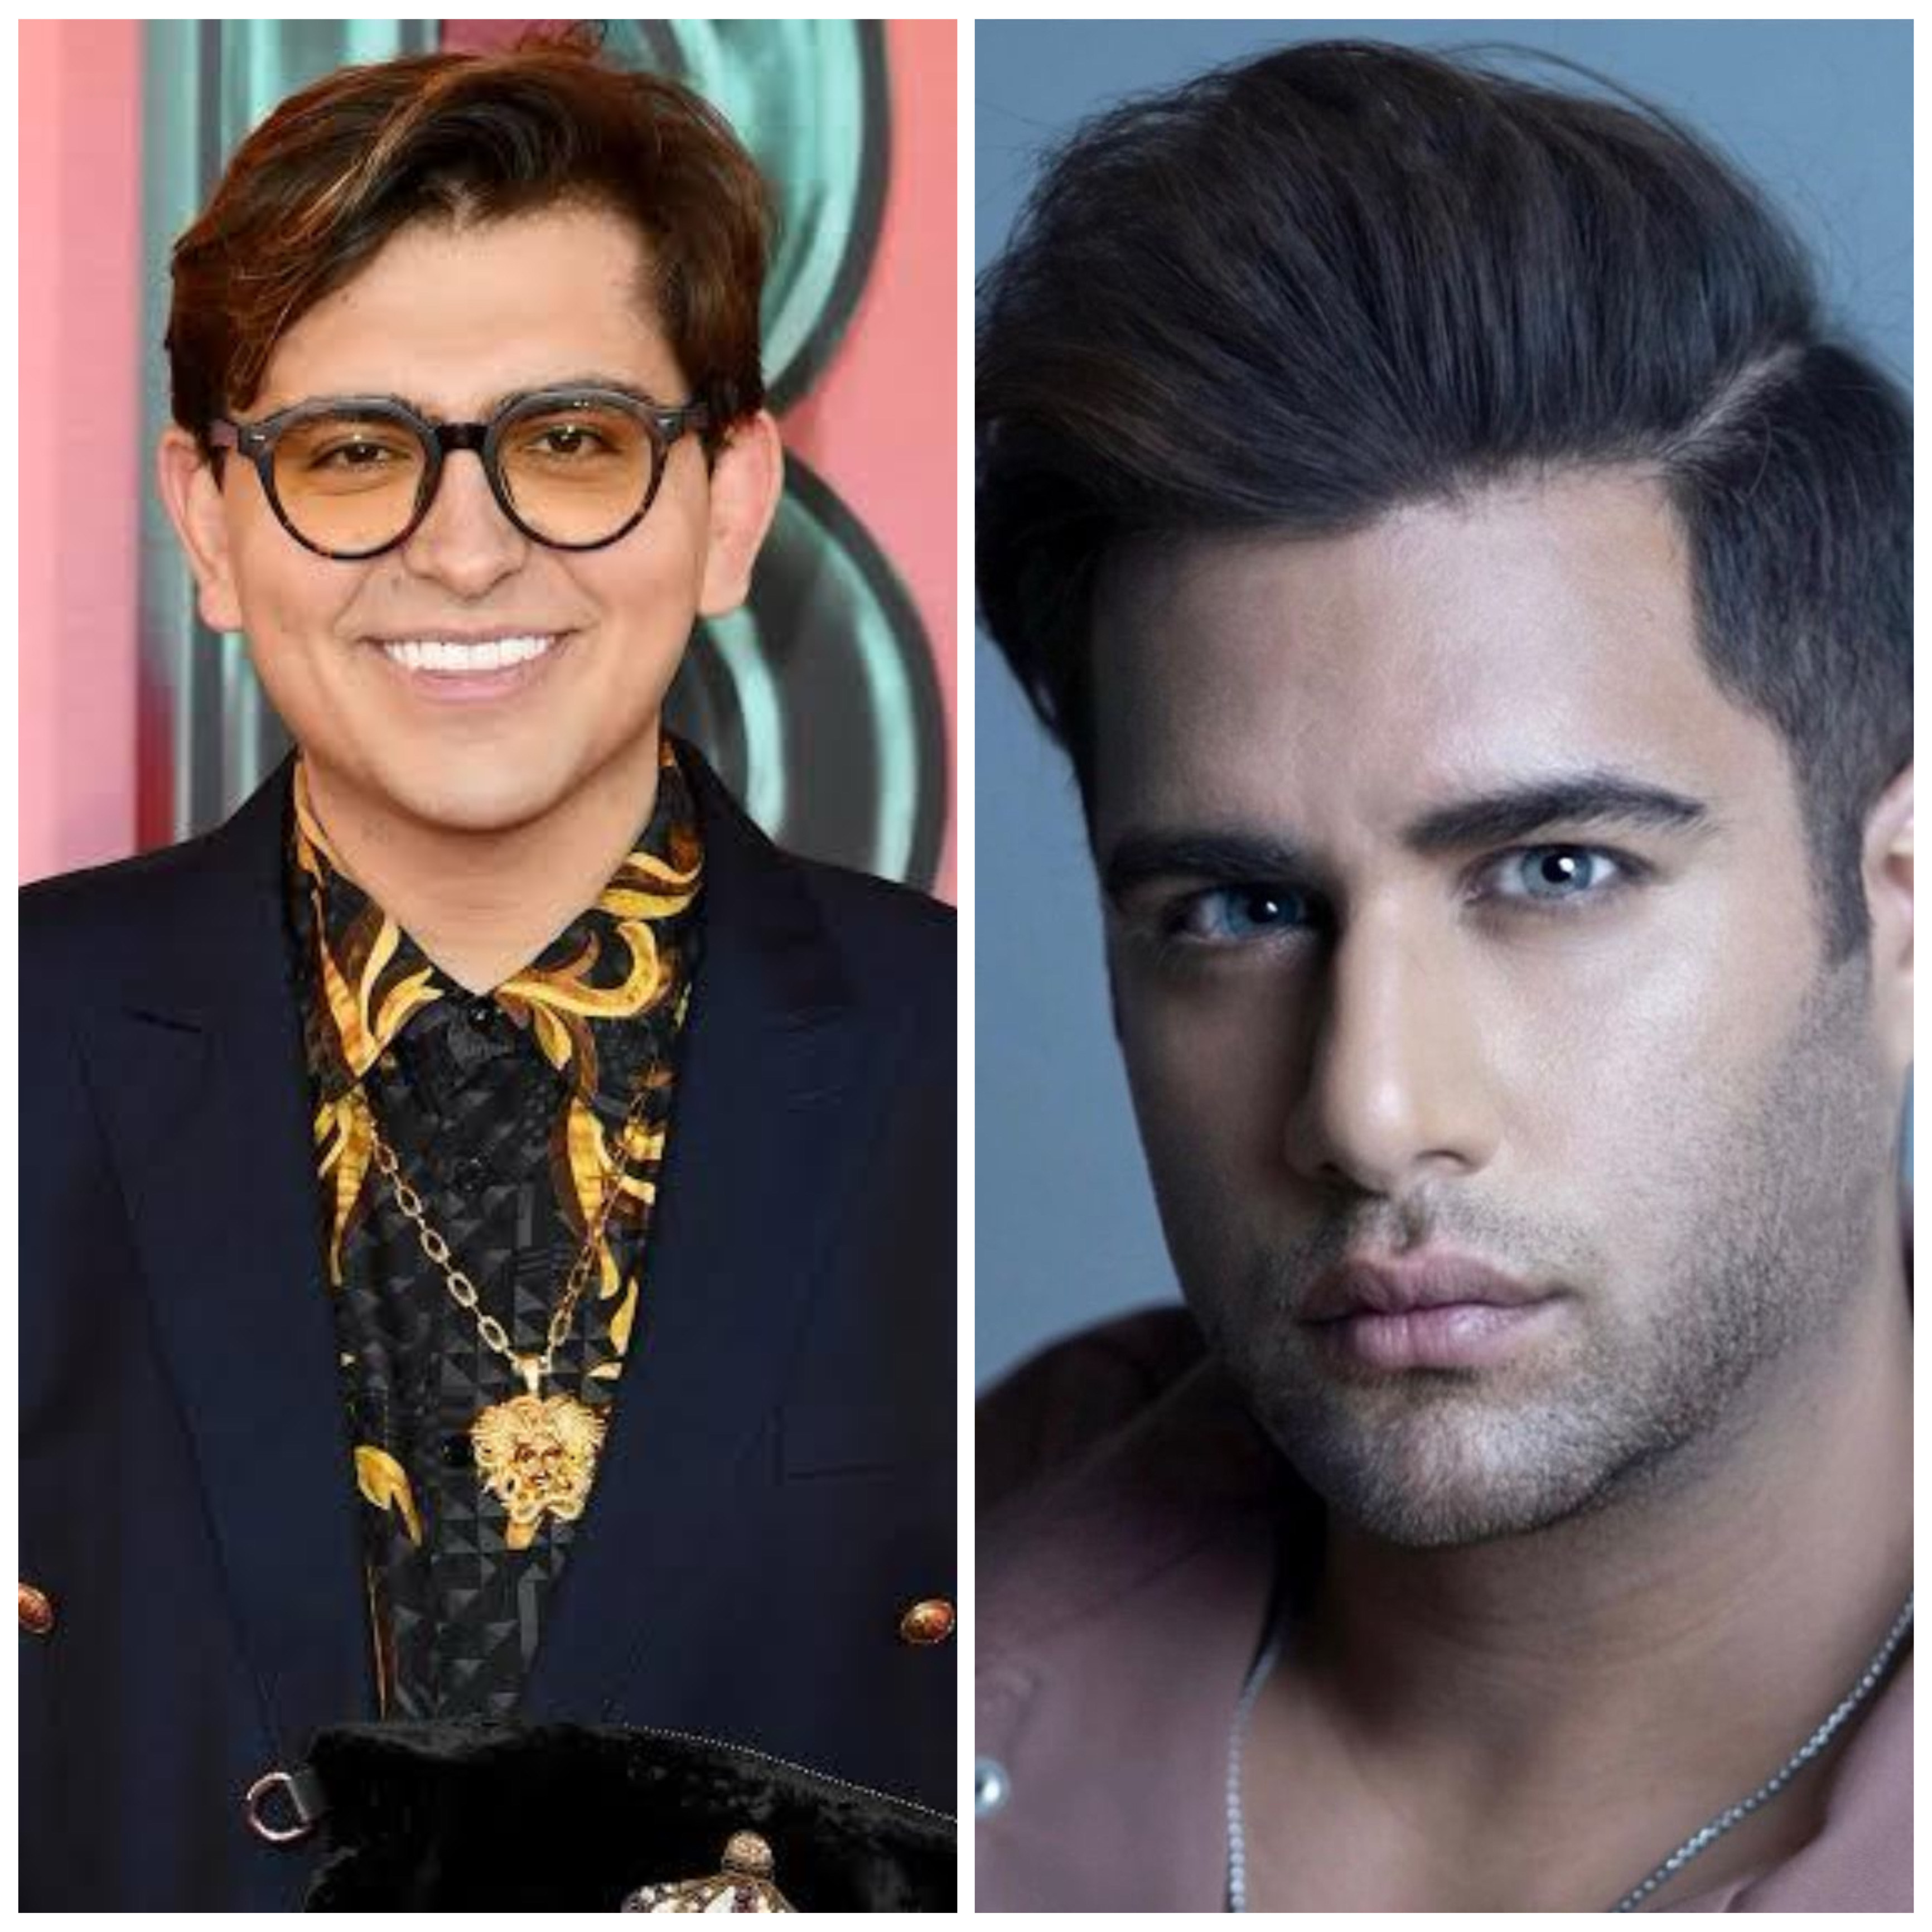 Bigg Boss 17 fame Navid Sole slams Rajiv Adatia’s snarky comments about only relatives and exes being cast into Bigg Boss now; says, “The irony is apparent given that the critic was both someone’s ex and someone’s brother during their time on Bigg Boss.”